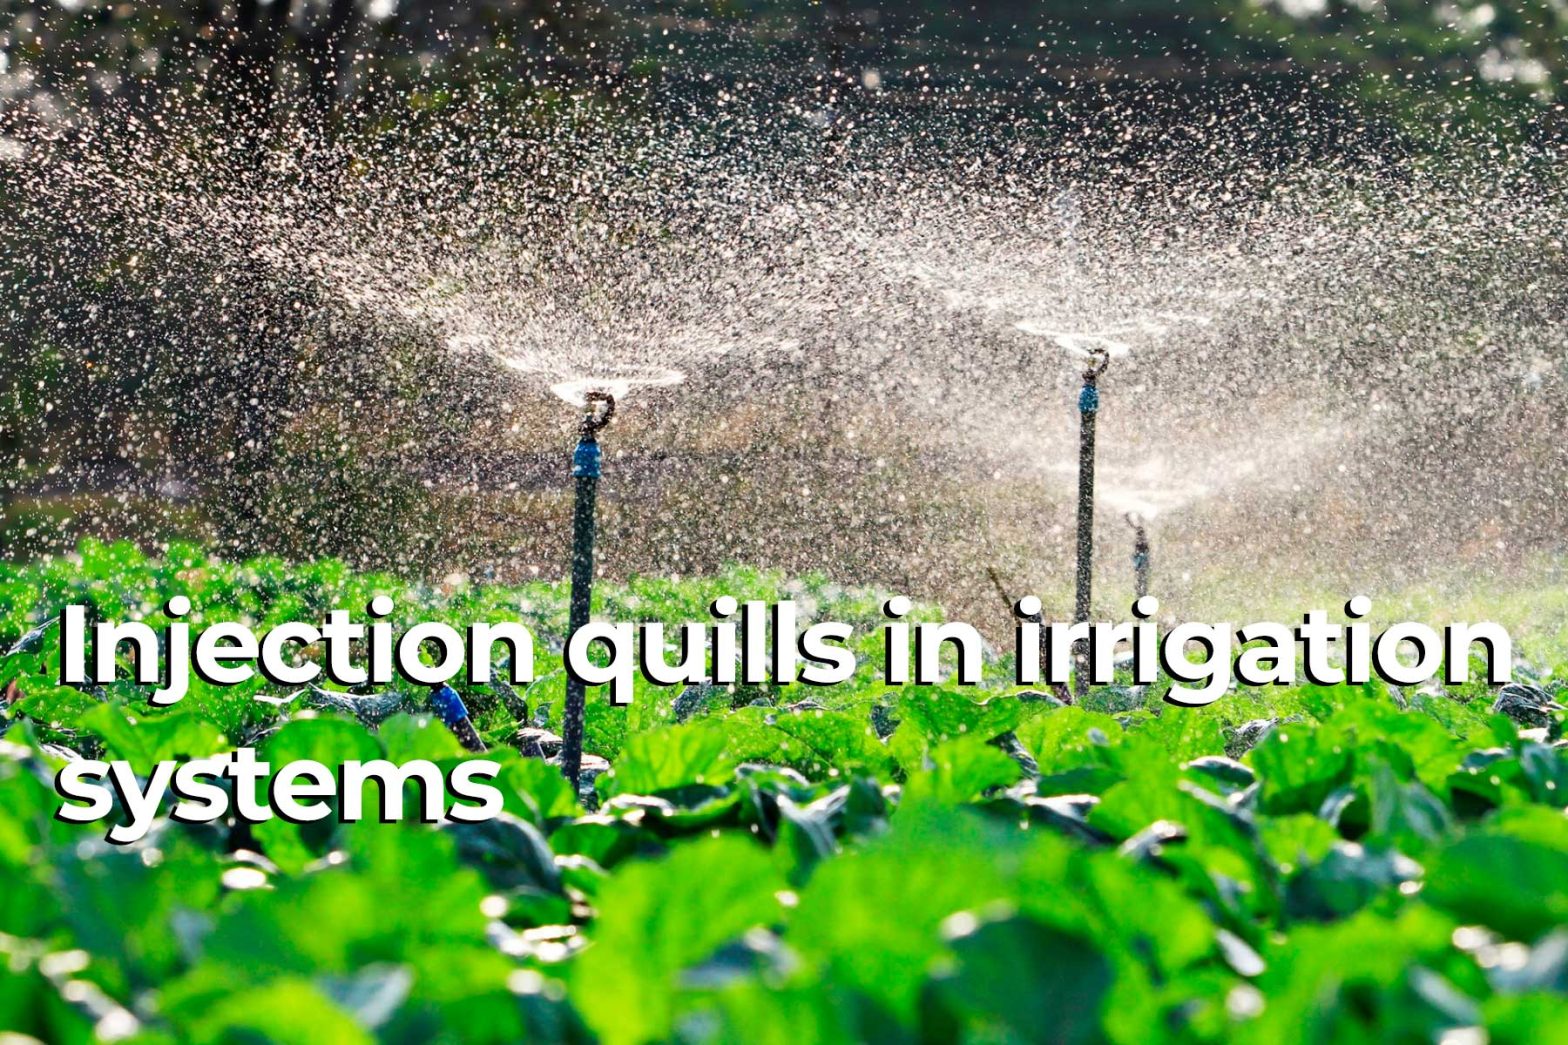 Environmental considerations in the future of injection quills in irrigation systems